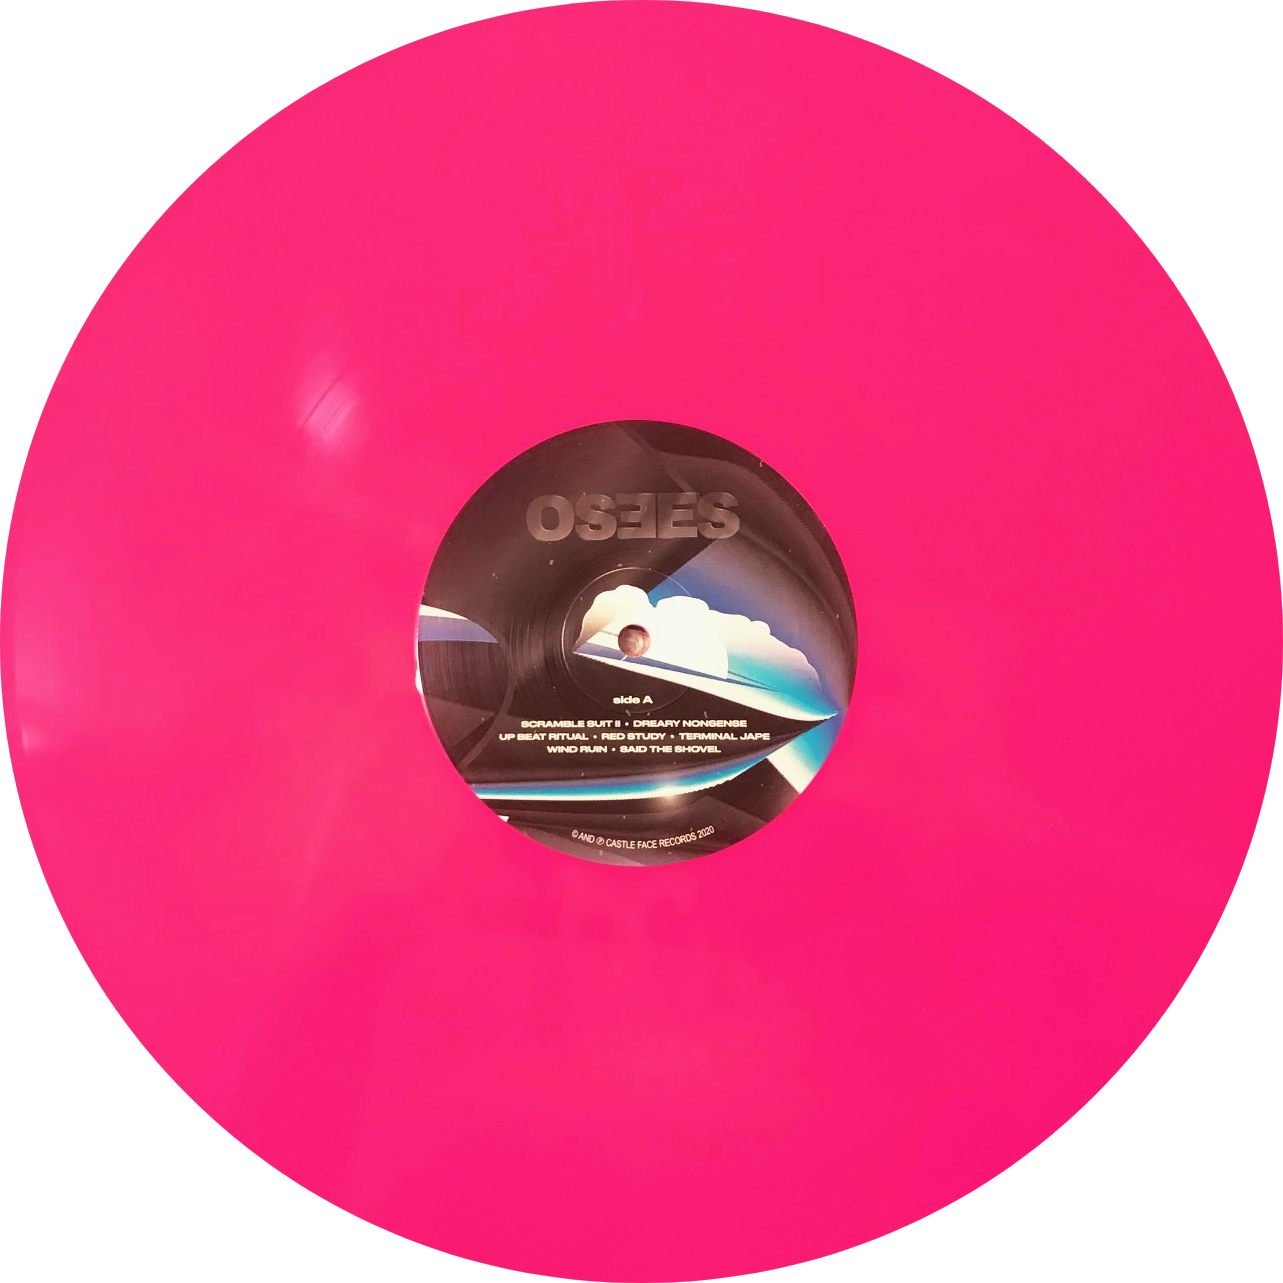 Arcade Sound - Osees - Protean Threat - Ltd Neon Pink Vinyl front cover